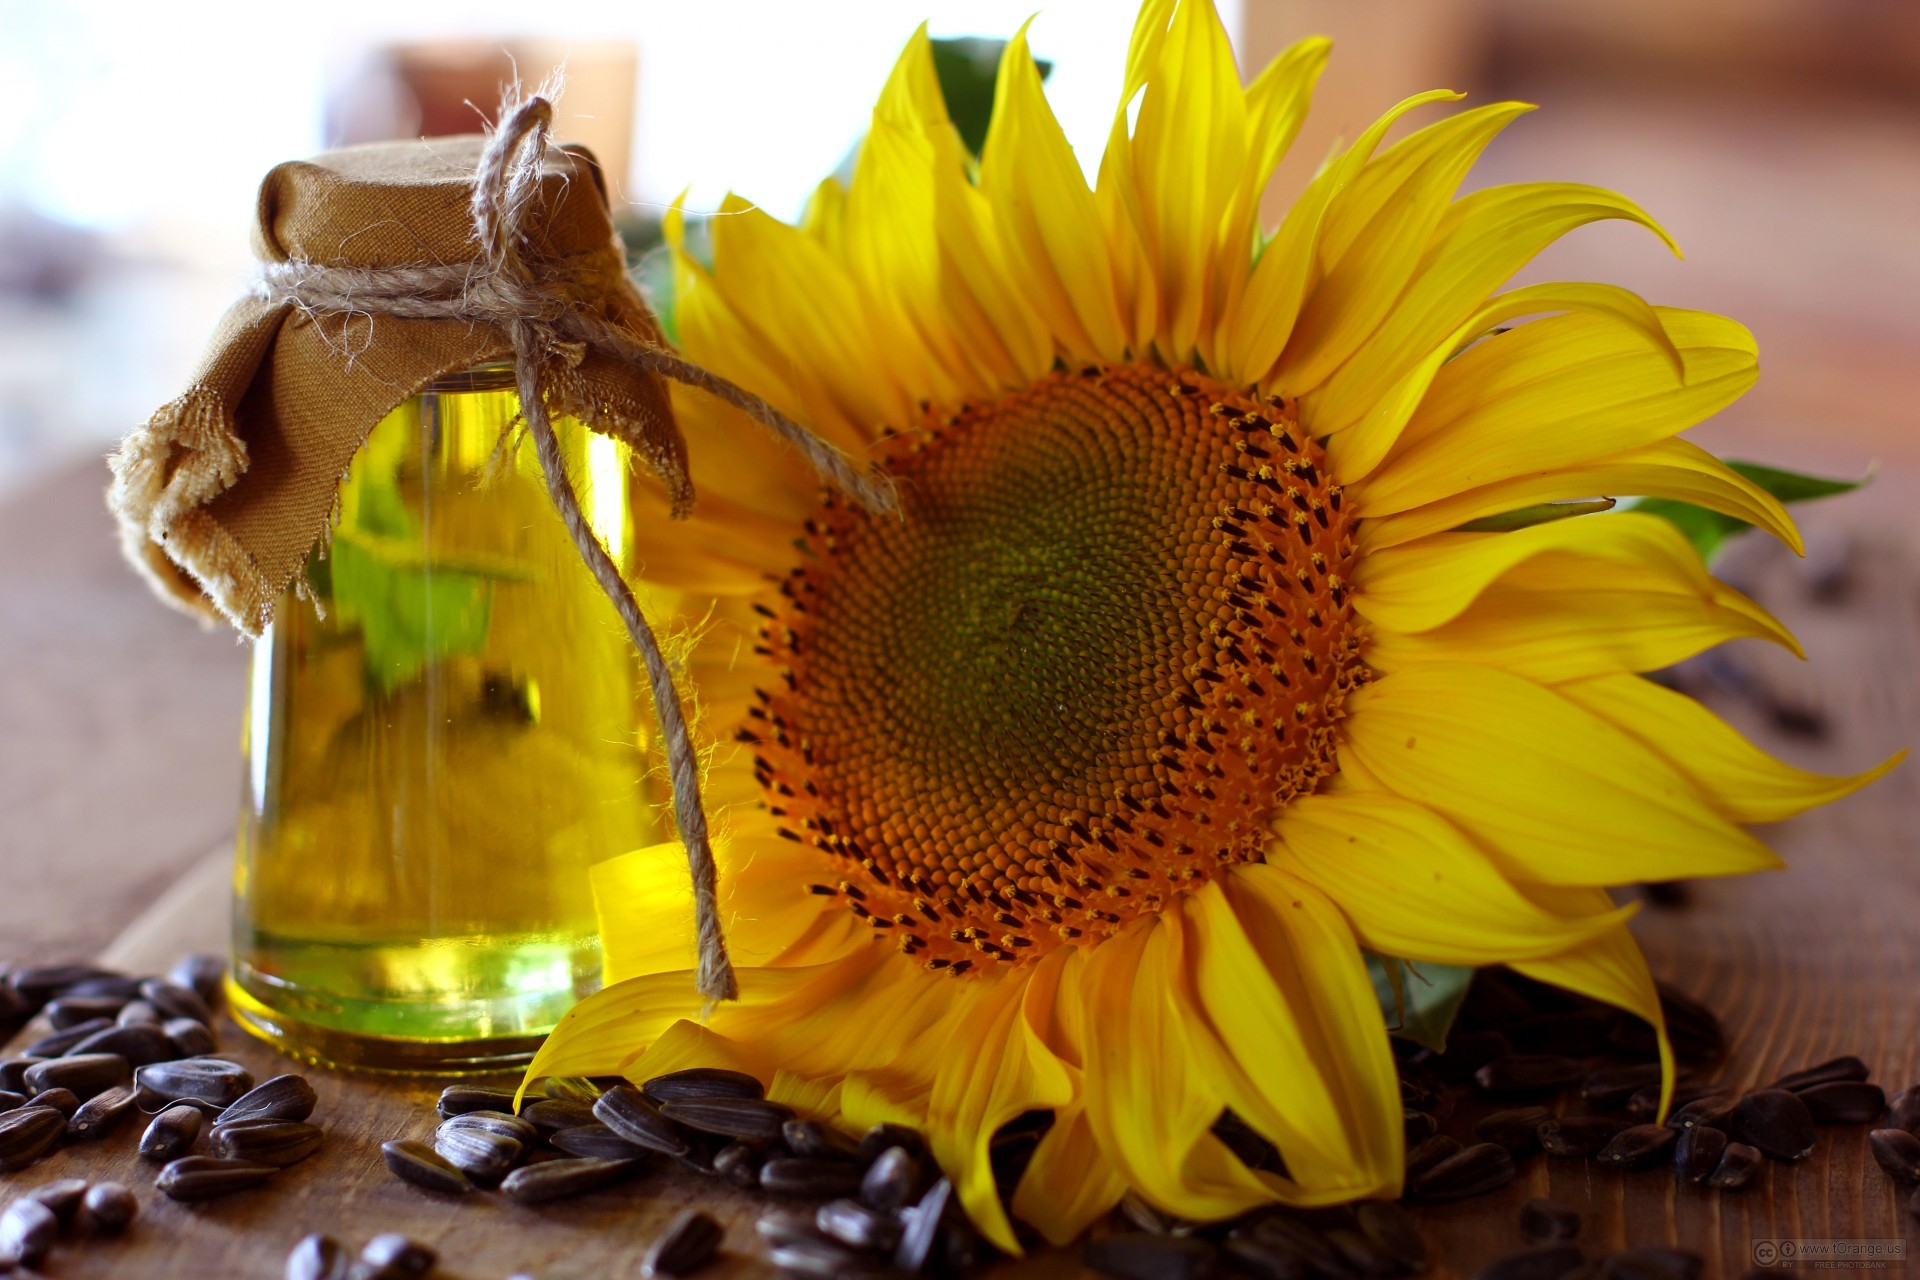 Ukraine maintains a high rate of sunflower oil export